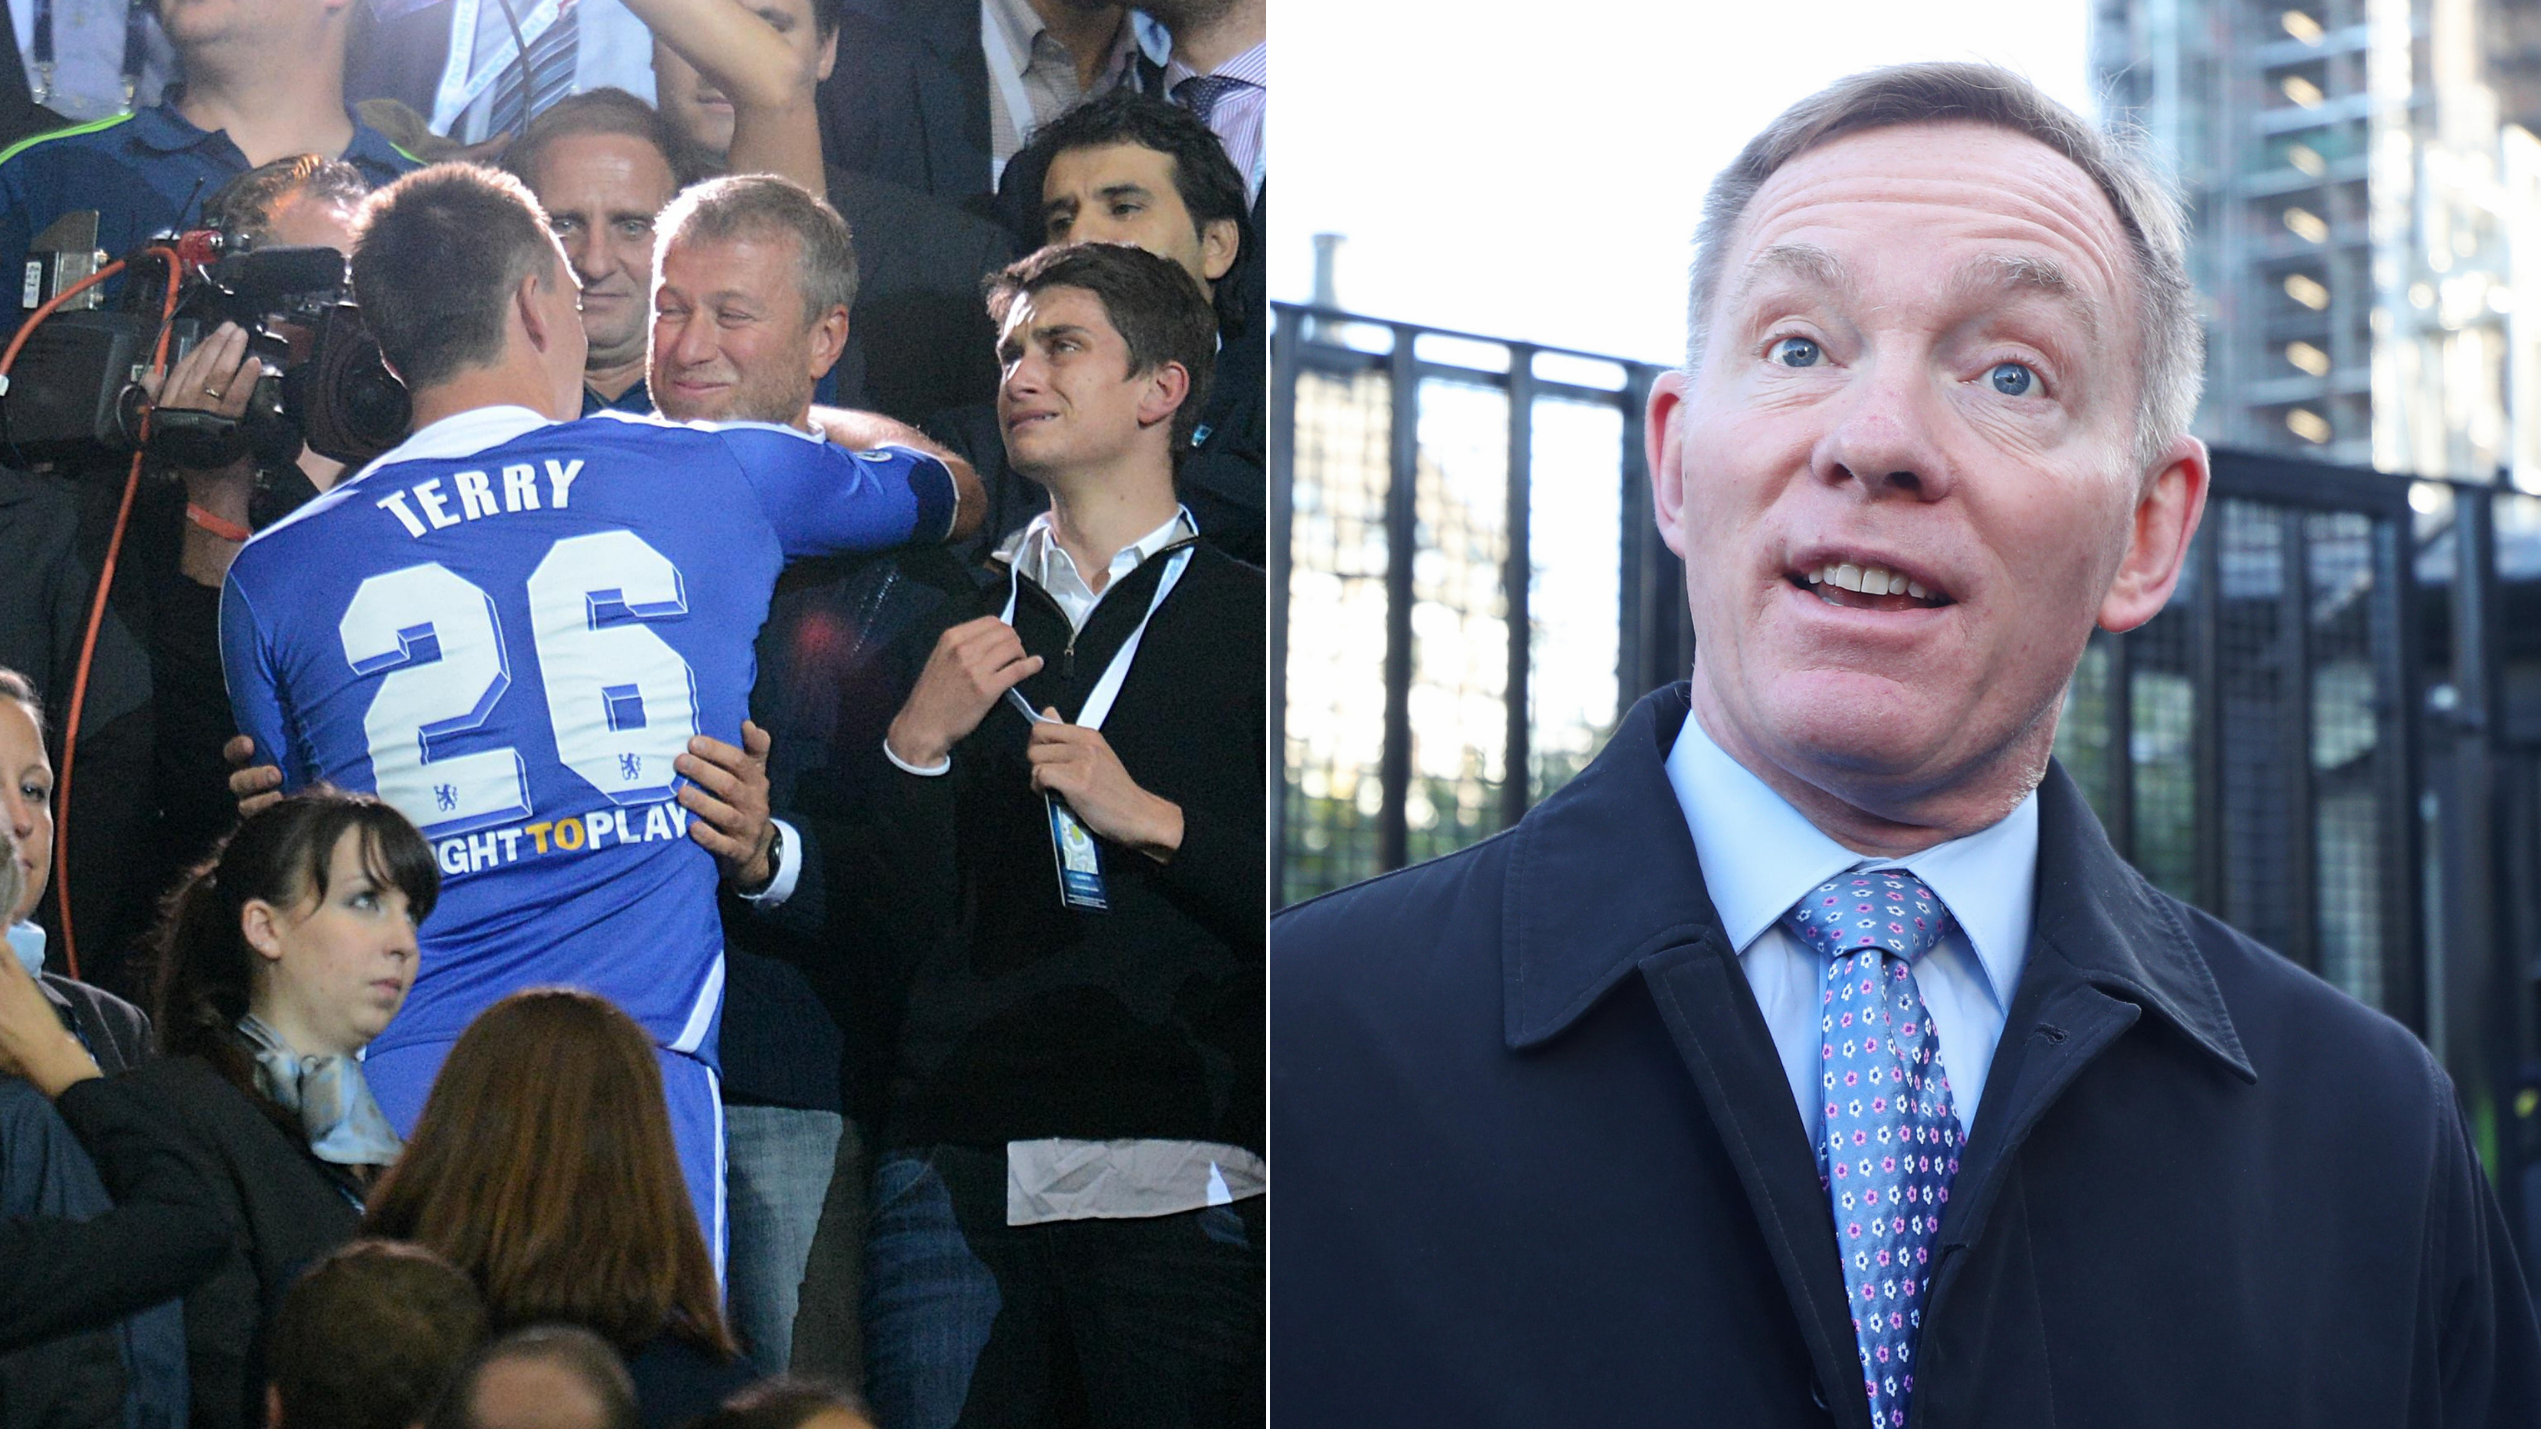 Chris Bryant What John Terry said about Abramovich was horrible